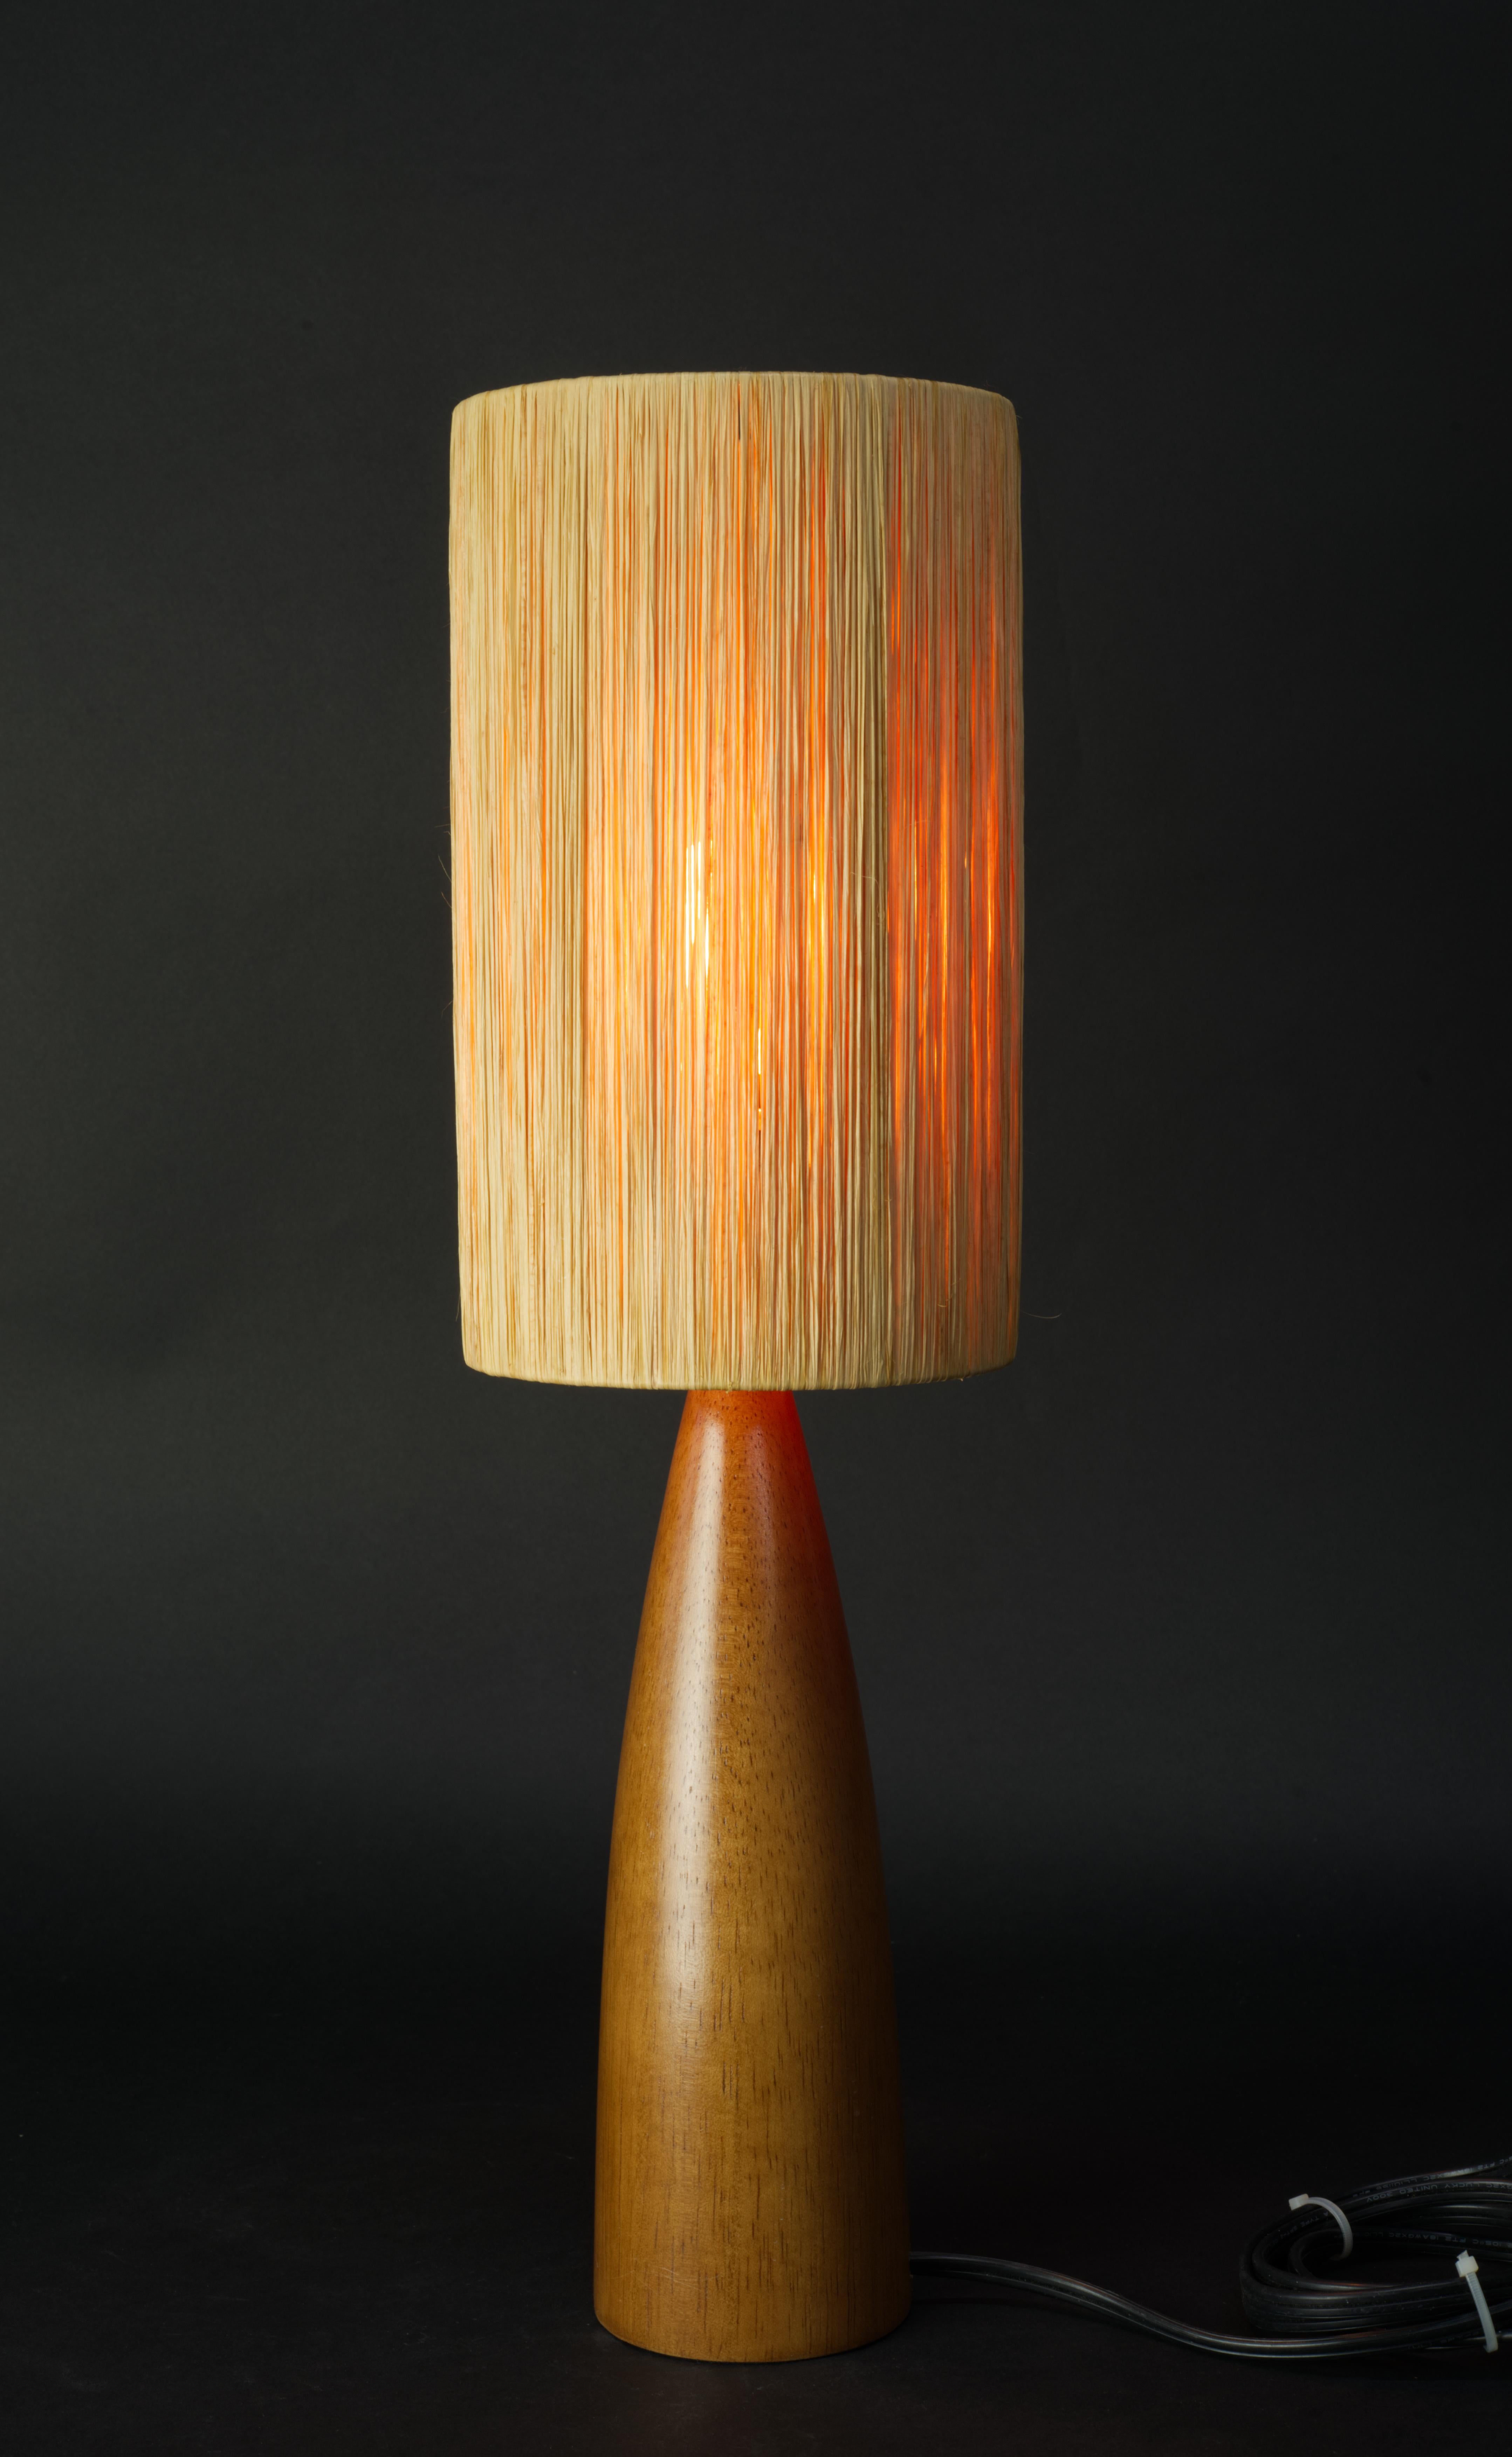  Elongated mid-century Scandinavian modern accent or table lamp is made of teak with straw shade. The lamp is highly decorative and has a small footprint, making it suitable for all living areas.

The lamp is 19.5